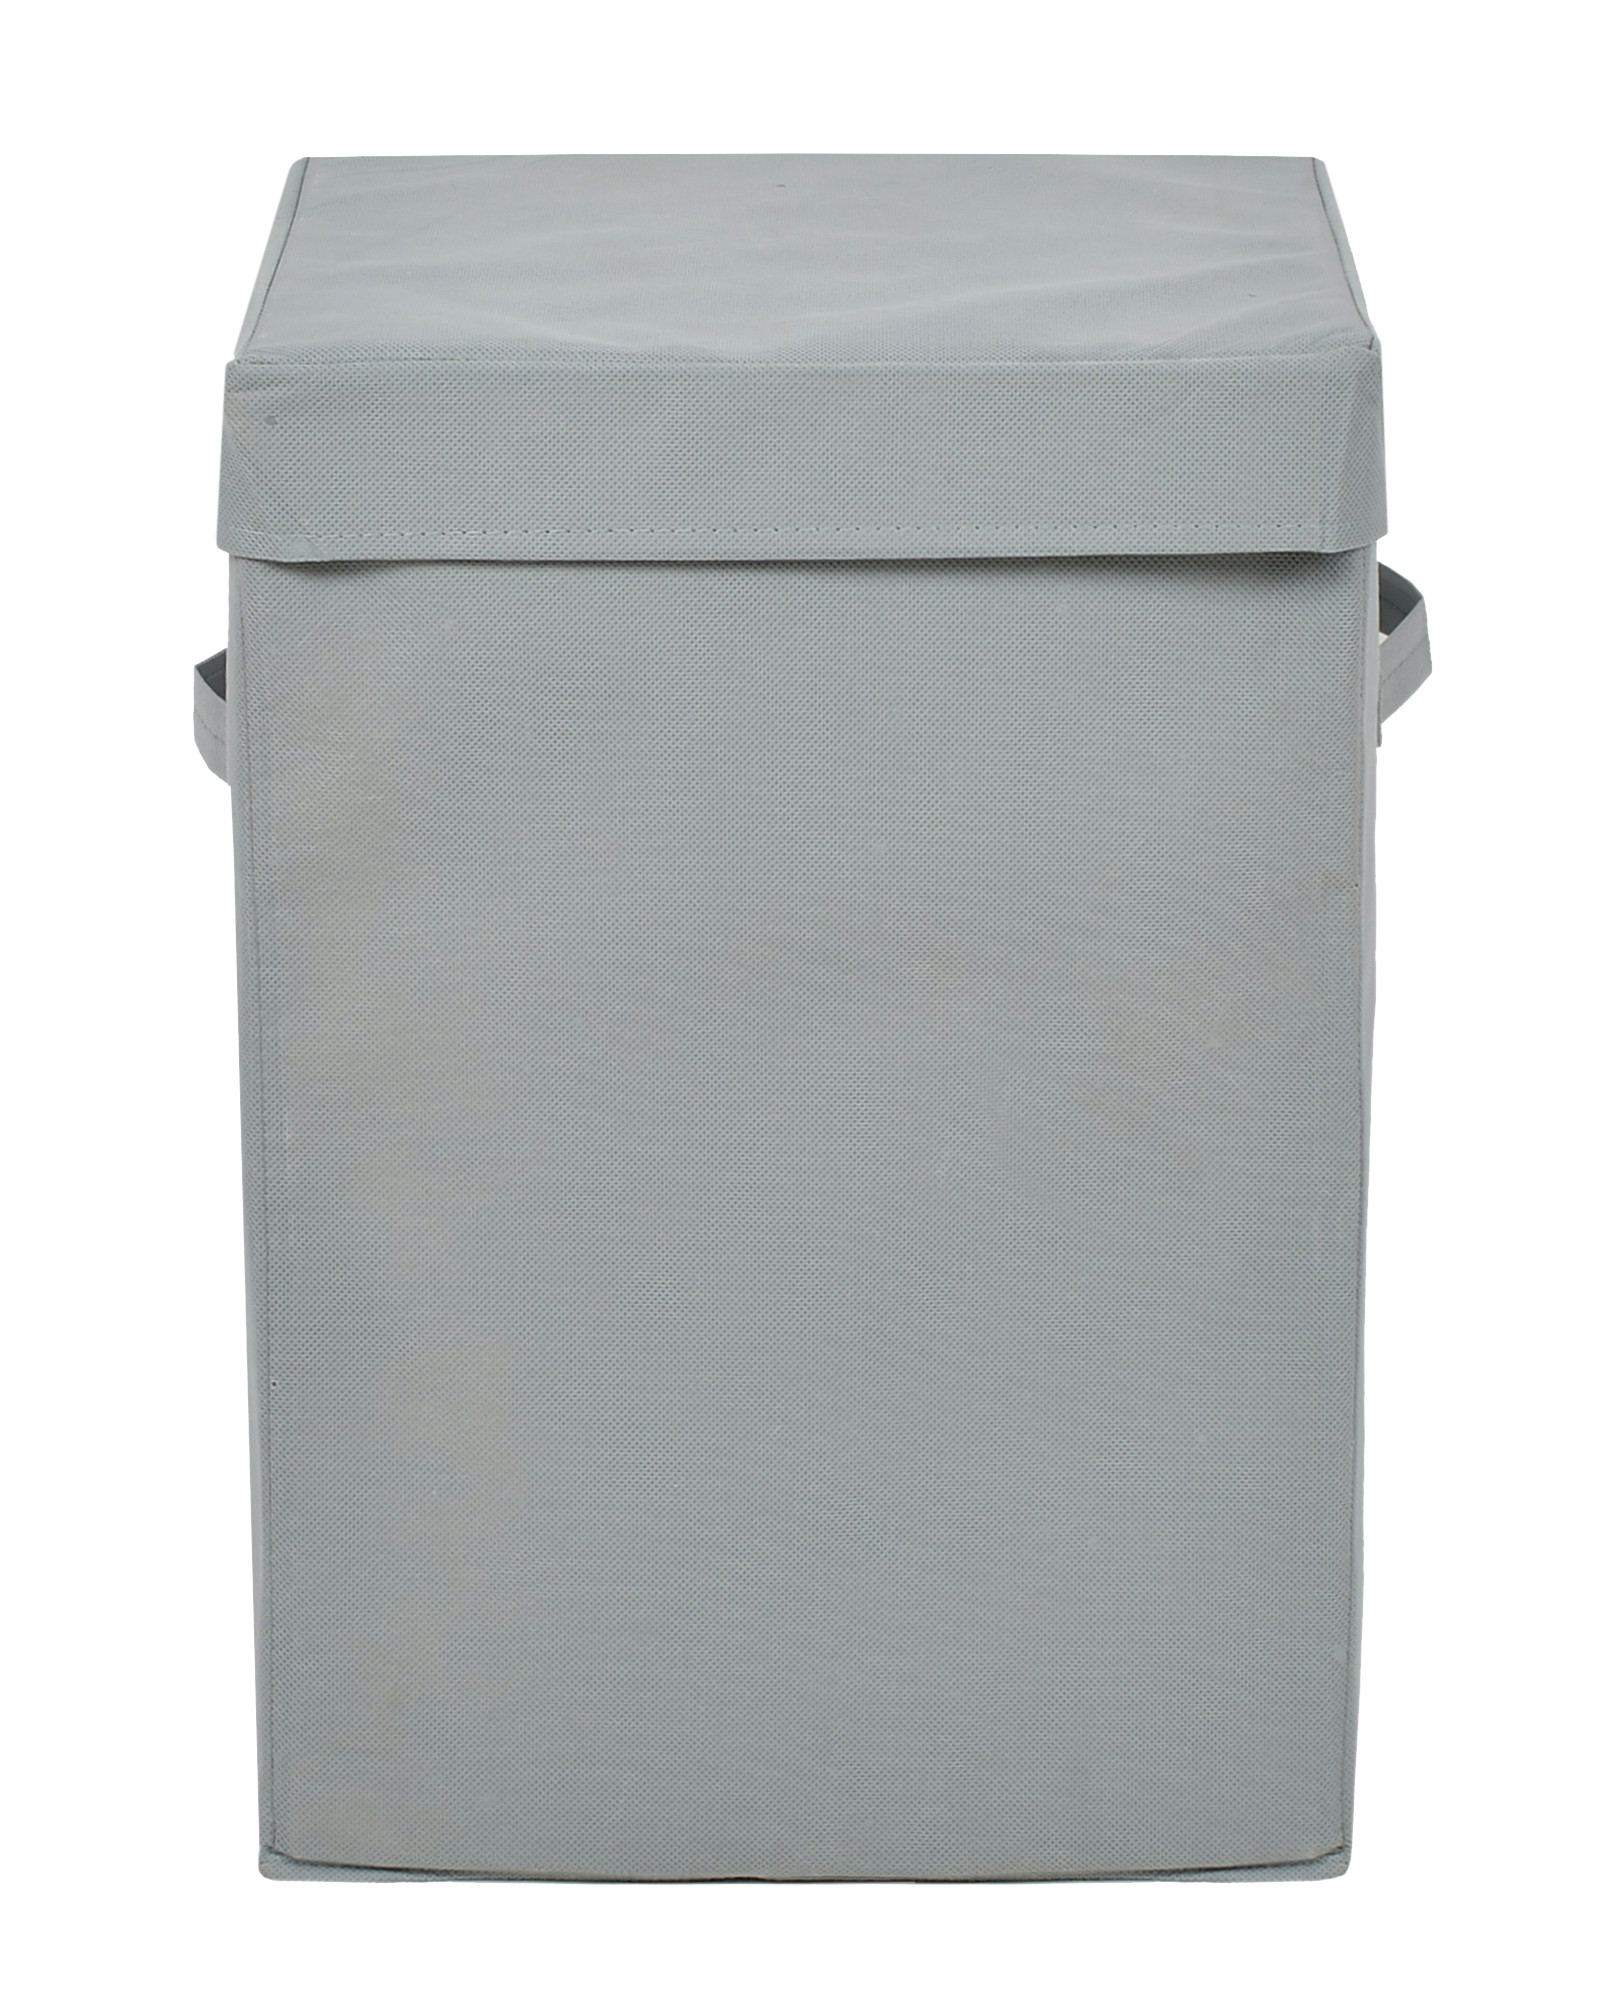 Kuber Industries Non-Woven Foldable Large Laundry basket/Hamper With Lid & Handles (Grey)-44KM0185